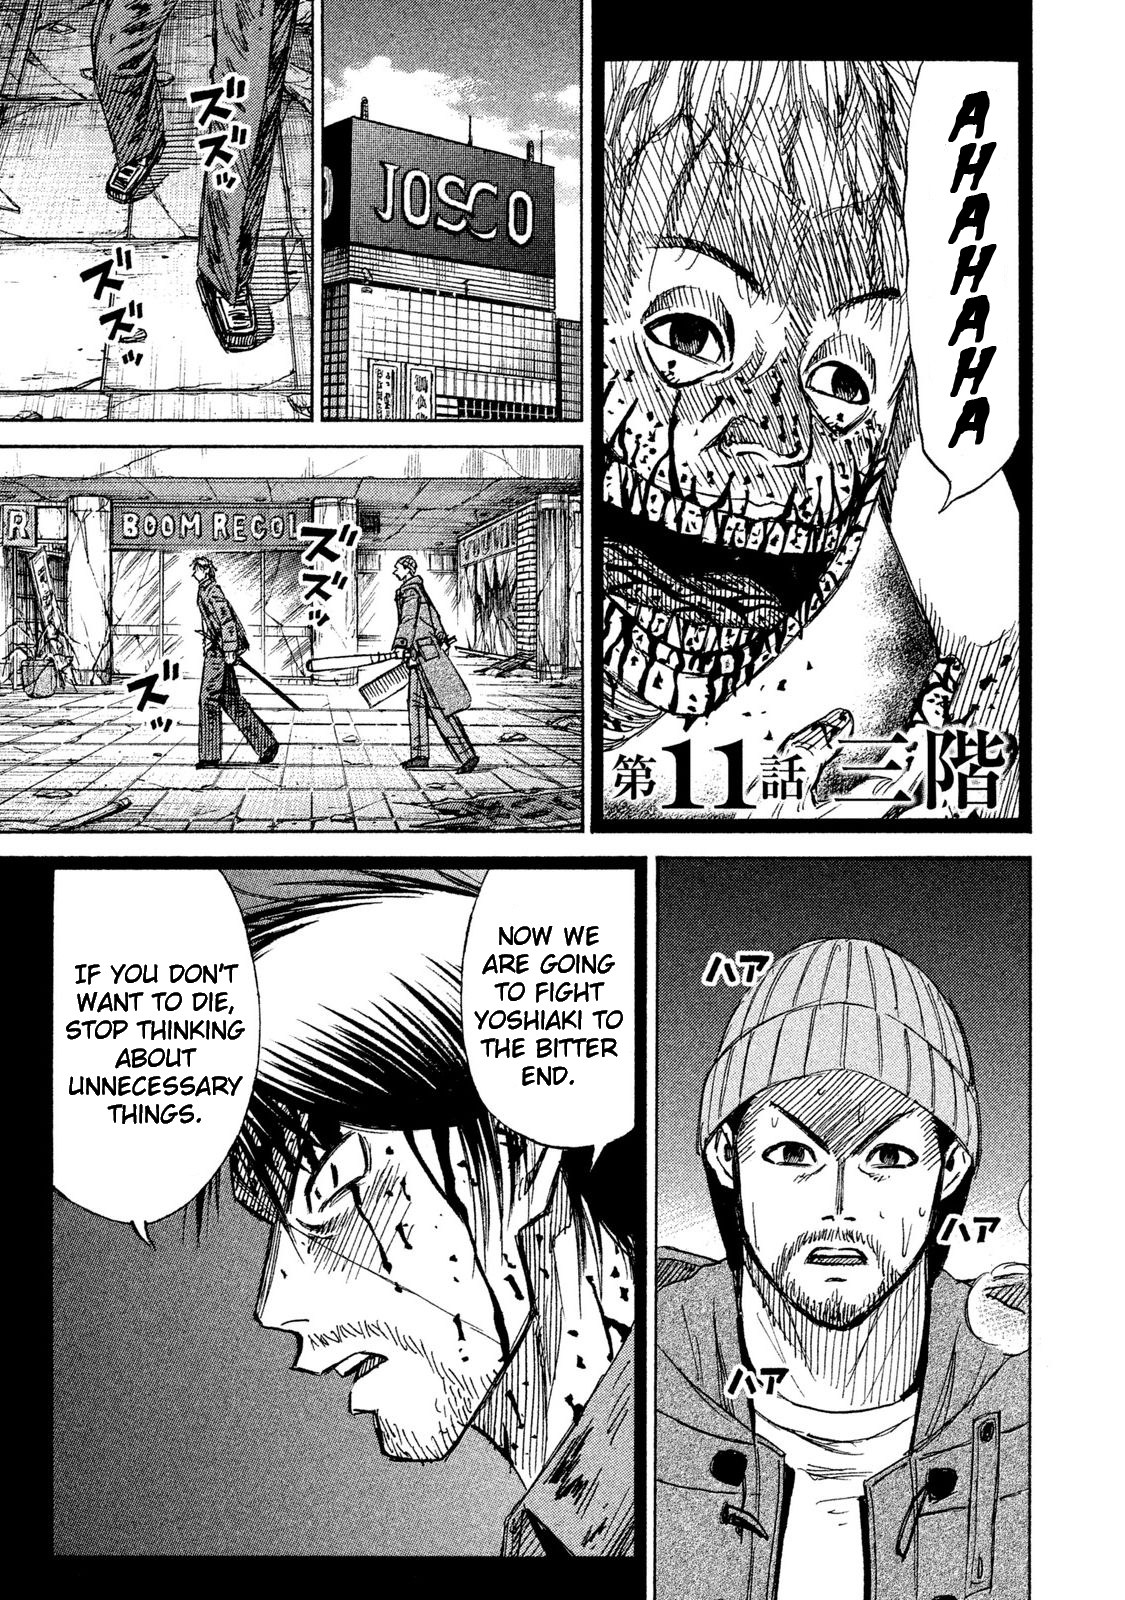 Higanjima - 48 Days Later Vol.2 Chapter 11: The Third Floor - Picture 1